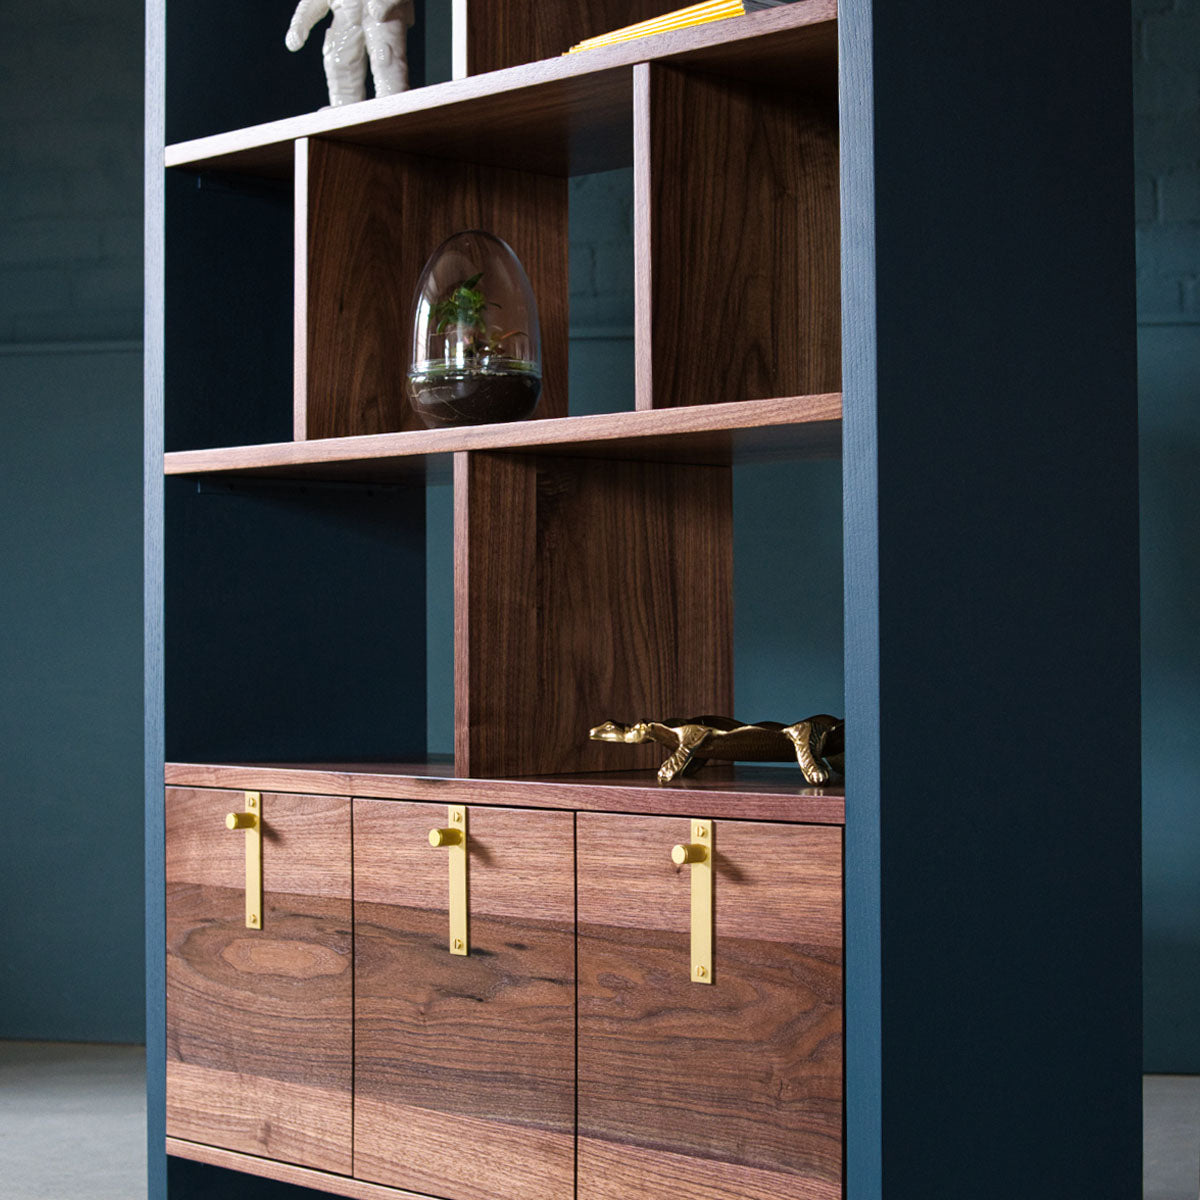 An image of the Walnut Bookcase, Aeris product available from Koda Studios